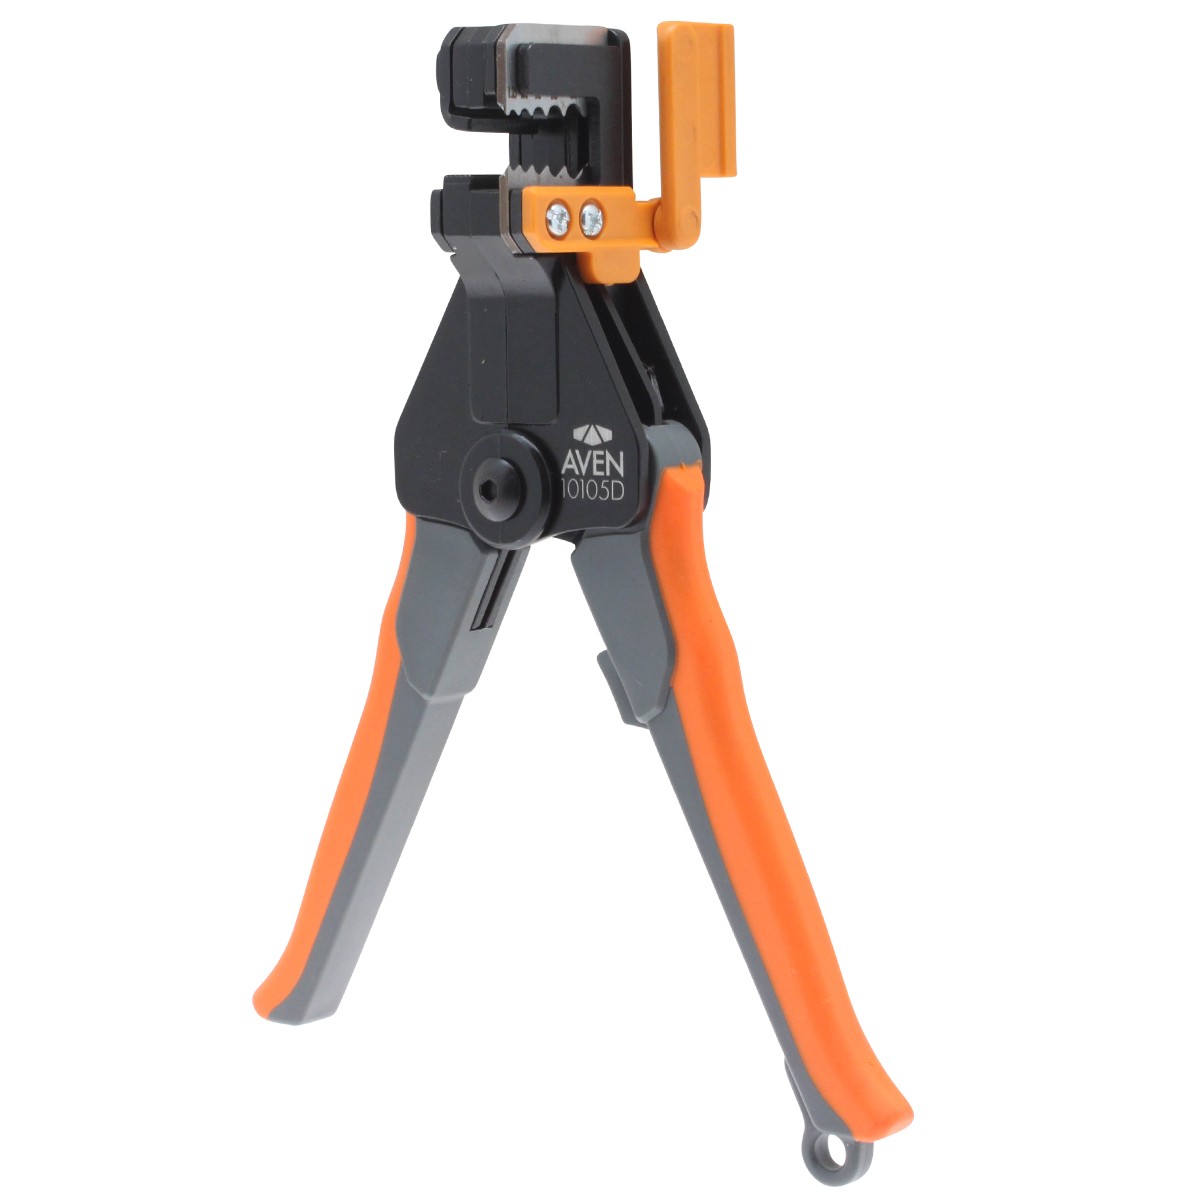 Aven Professional Automatic Wire Stripper 10105D Range: 16-8 AWG 